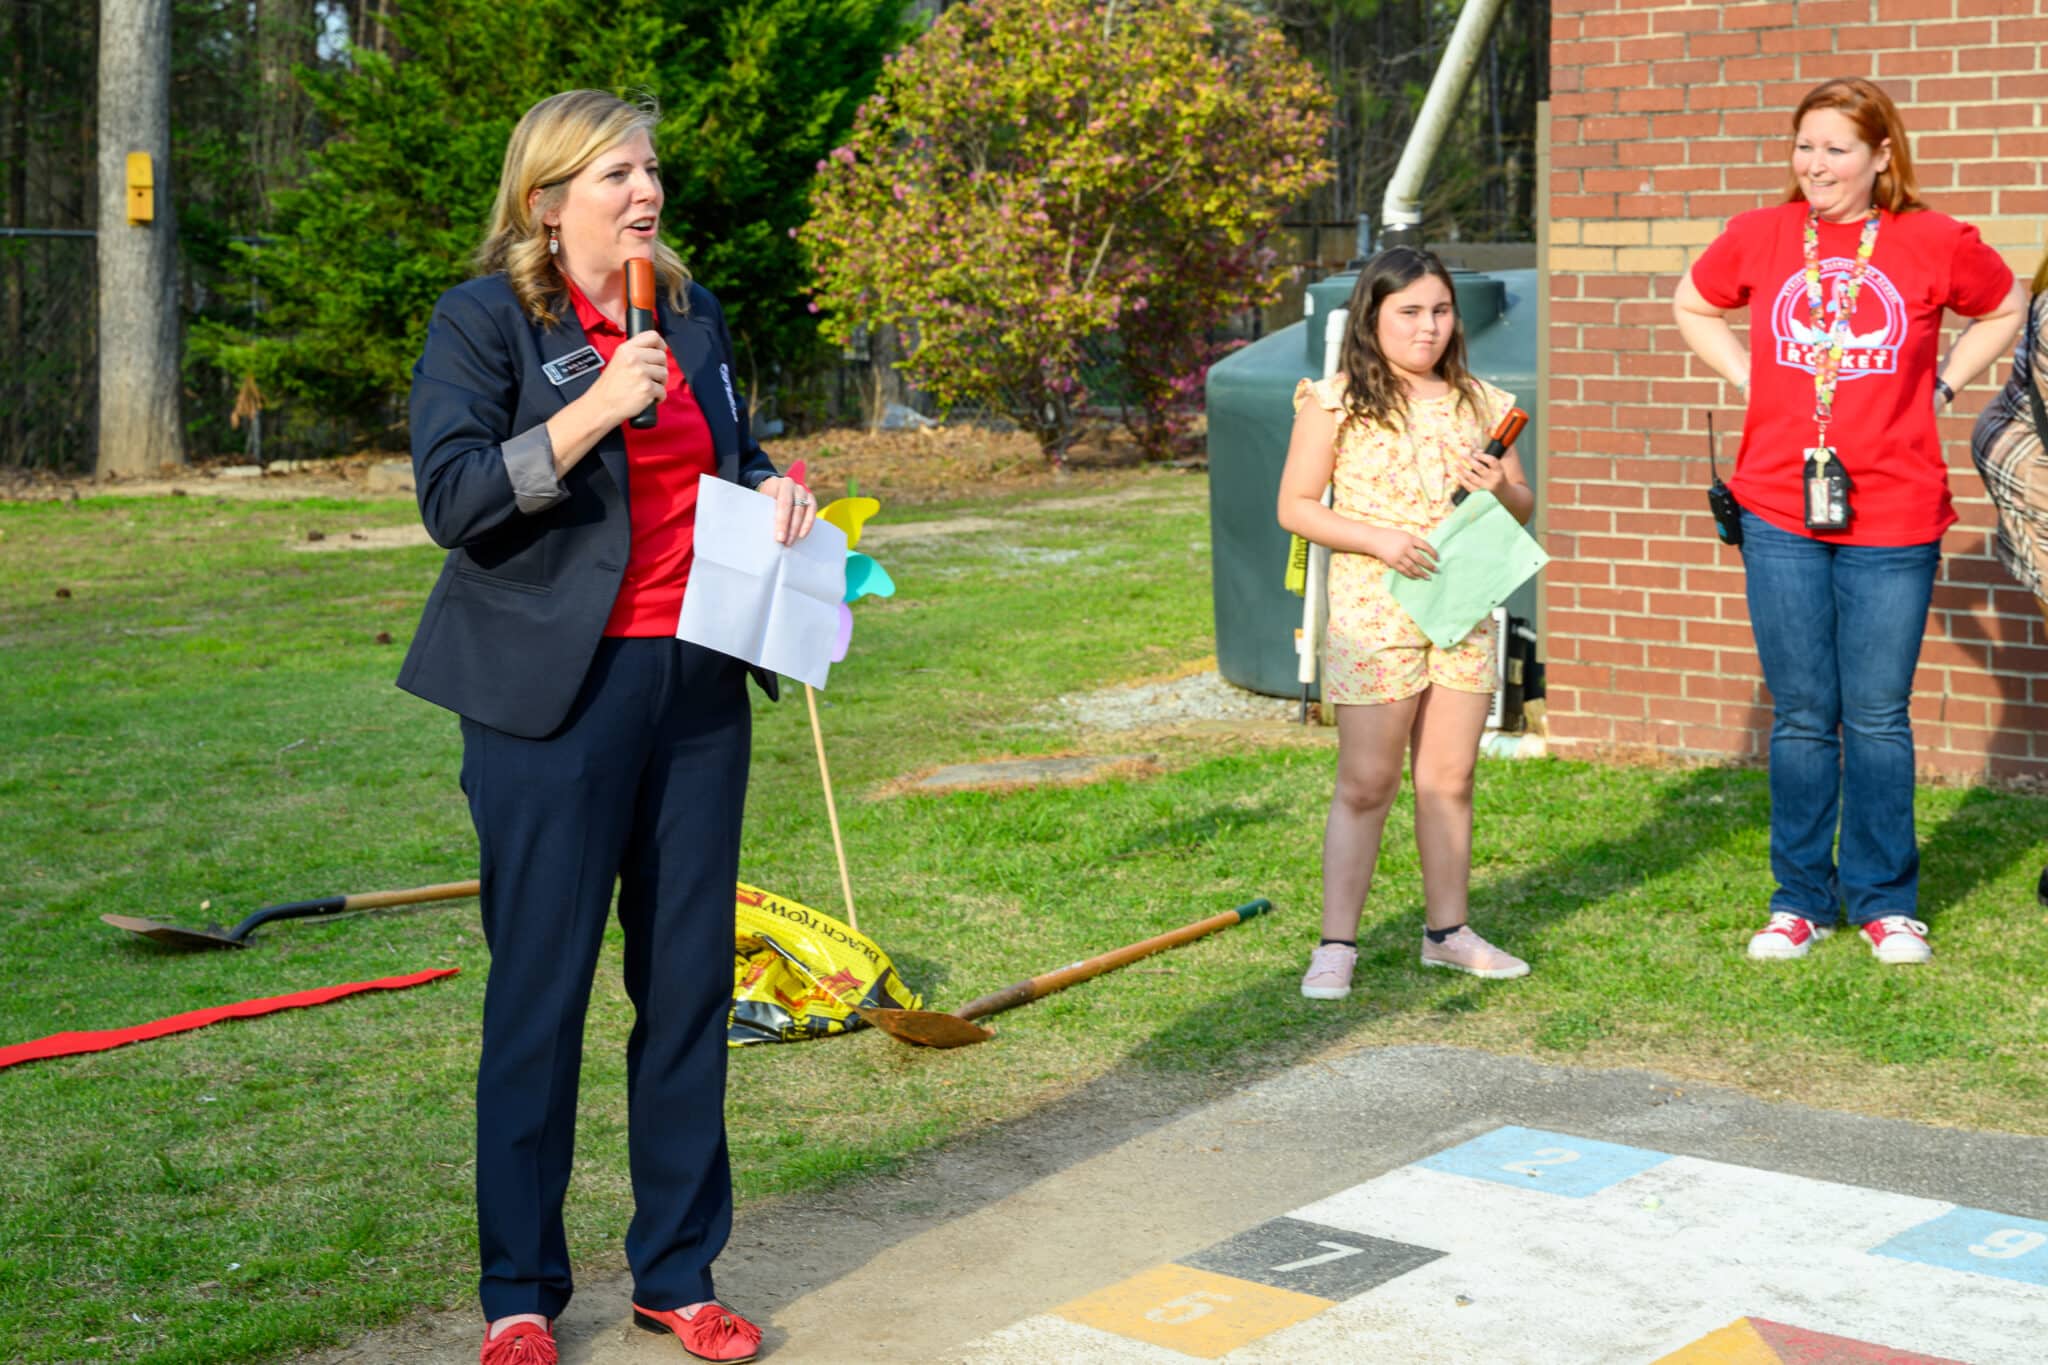 Stripling Elementary embarks on a journey with the launch of its STEM Garden, fostering curiosity and exploration among students.